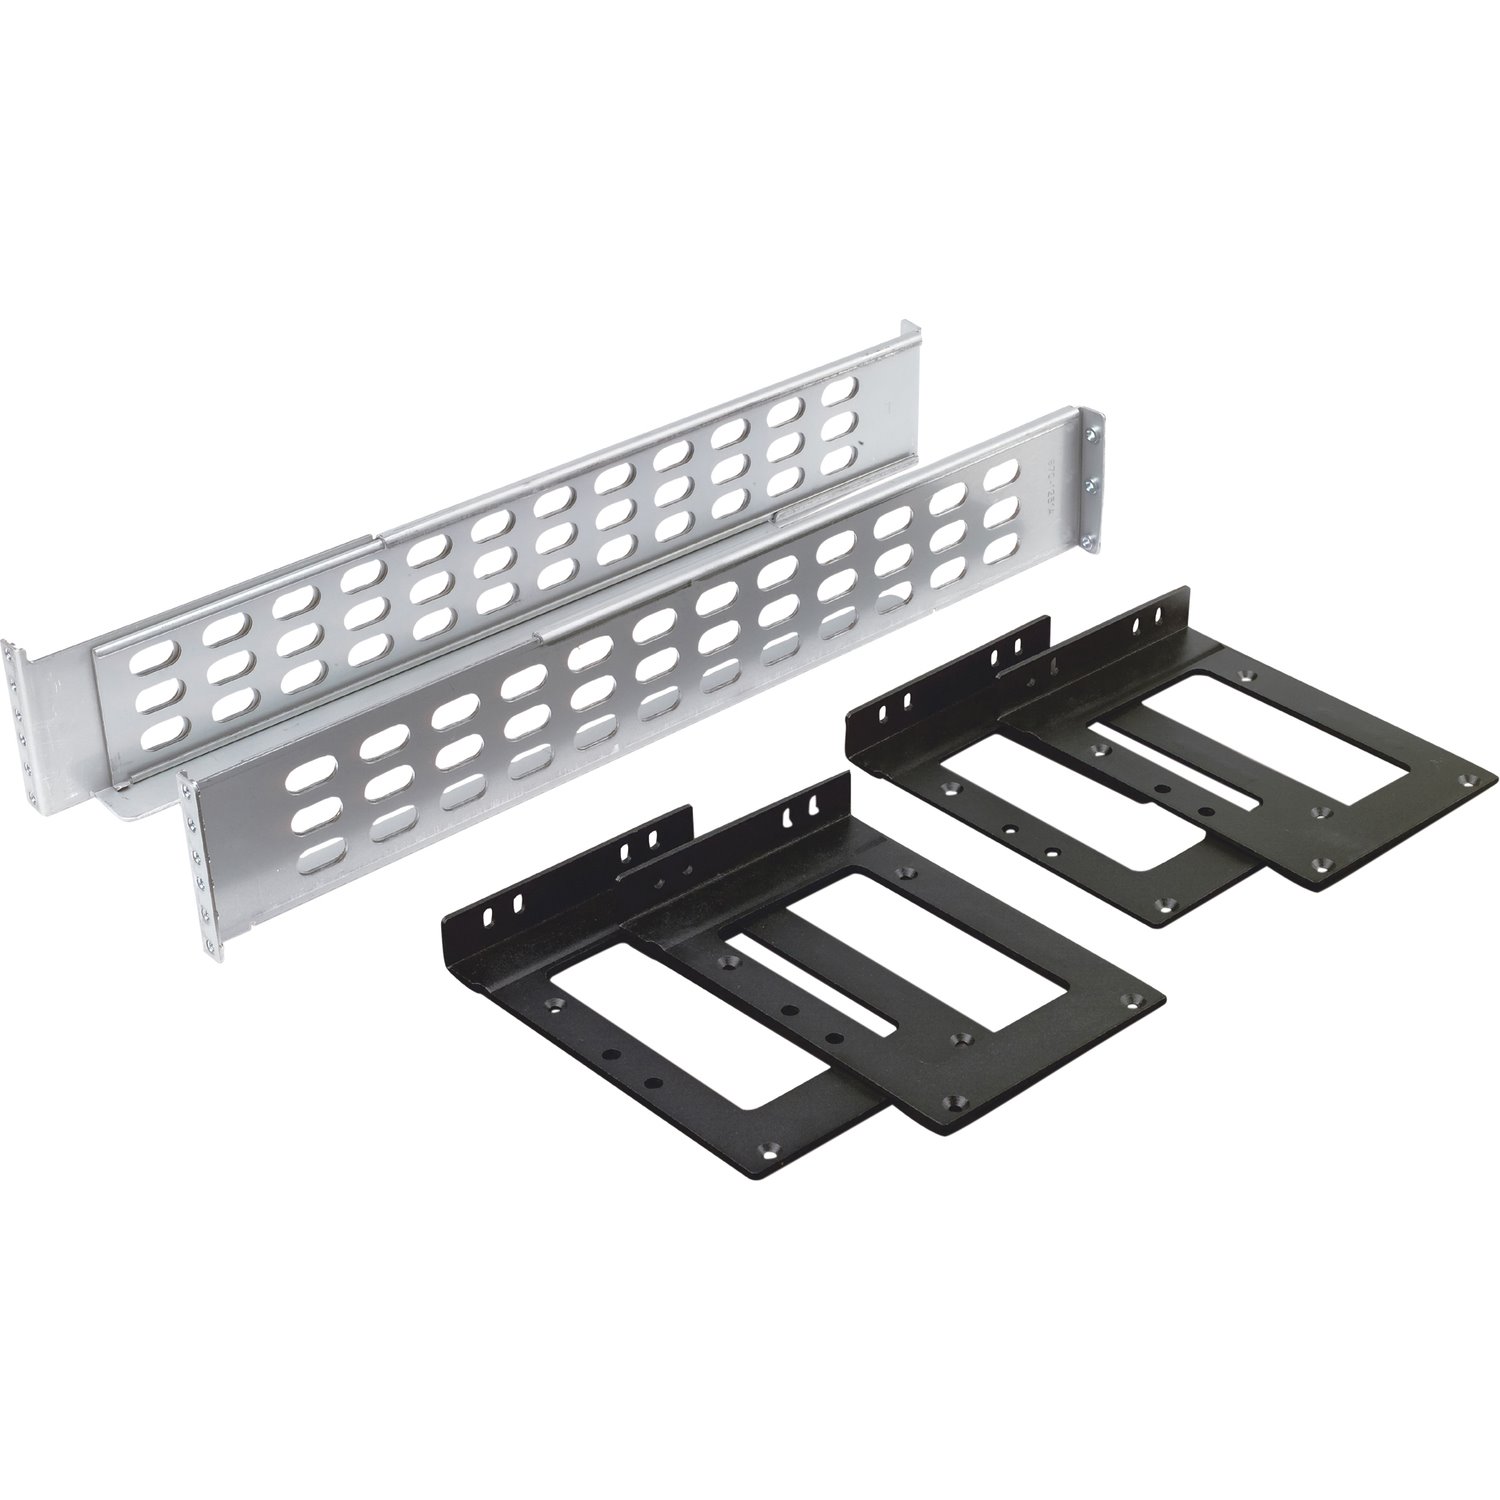 APC by Schneider Electric Mounting Rail Kit for UPS - Grey